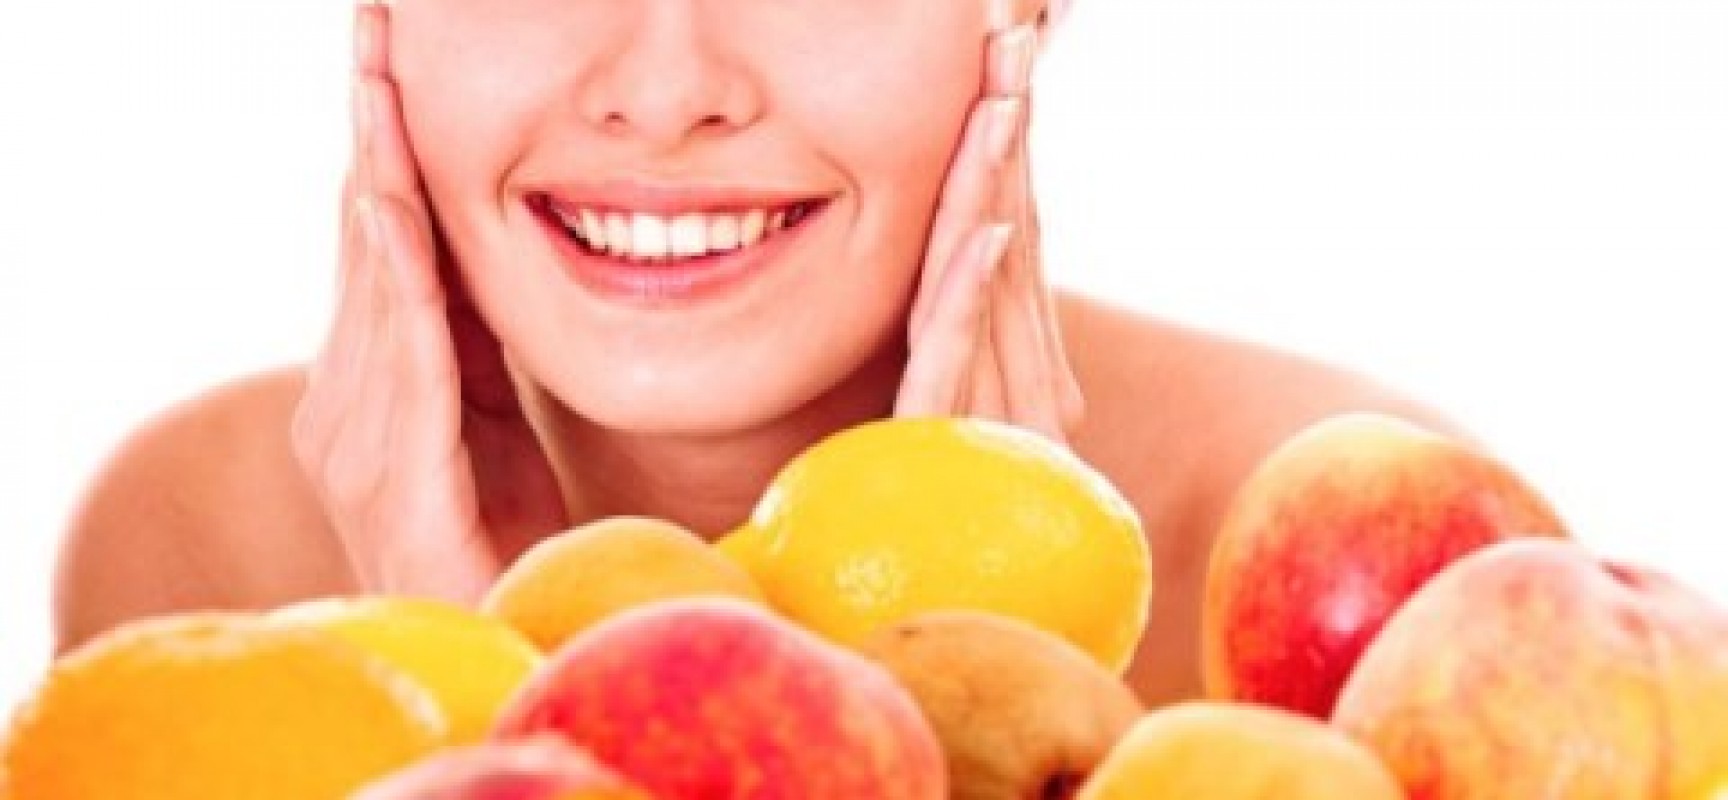 Foods which are best for skin